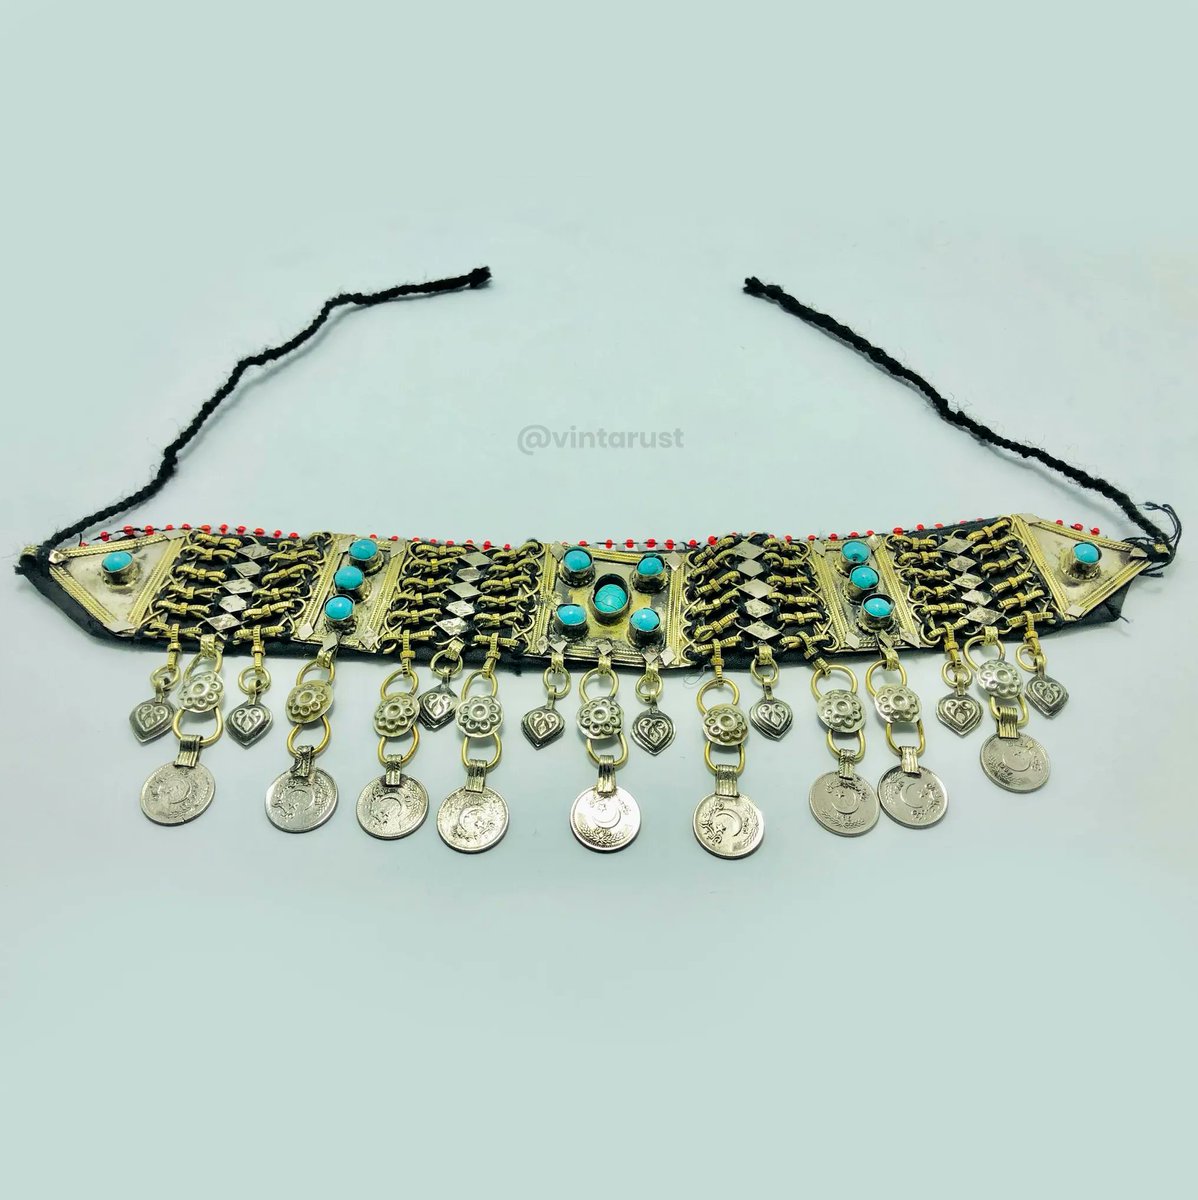 Afghan Vintage Dangling Coins Choker Necklace Inliad With Turquoise Stones, Boho Kuchi Choker, Vintage Coins Jewelry, Tribal Necklace

Order Now:
buff.ly/3msObpW 

#choker #chokernecklace #summernecklace #colorfuljewelry #necklaceoftheday #turquoisejewelry